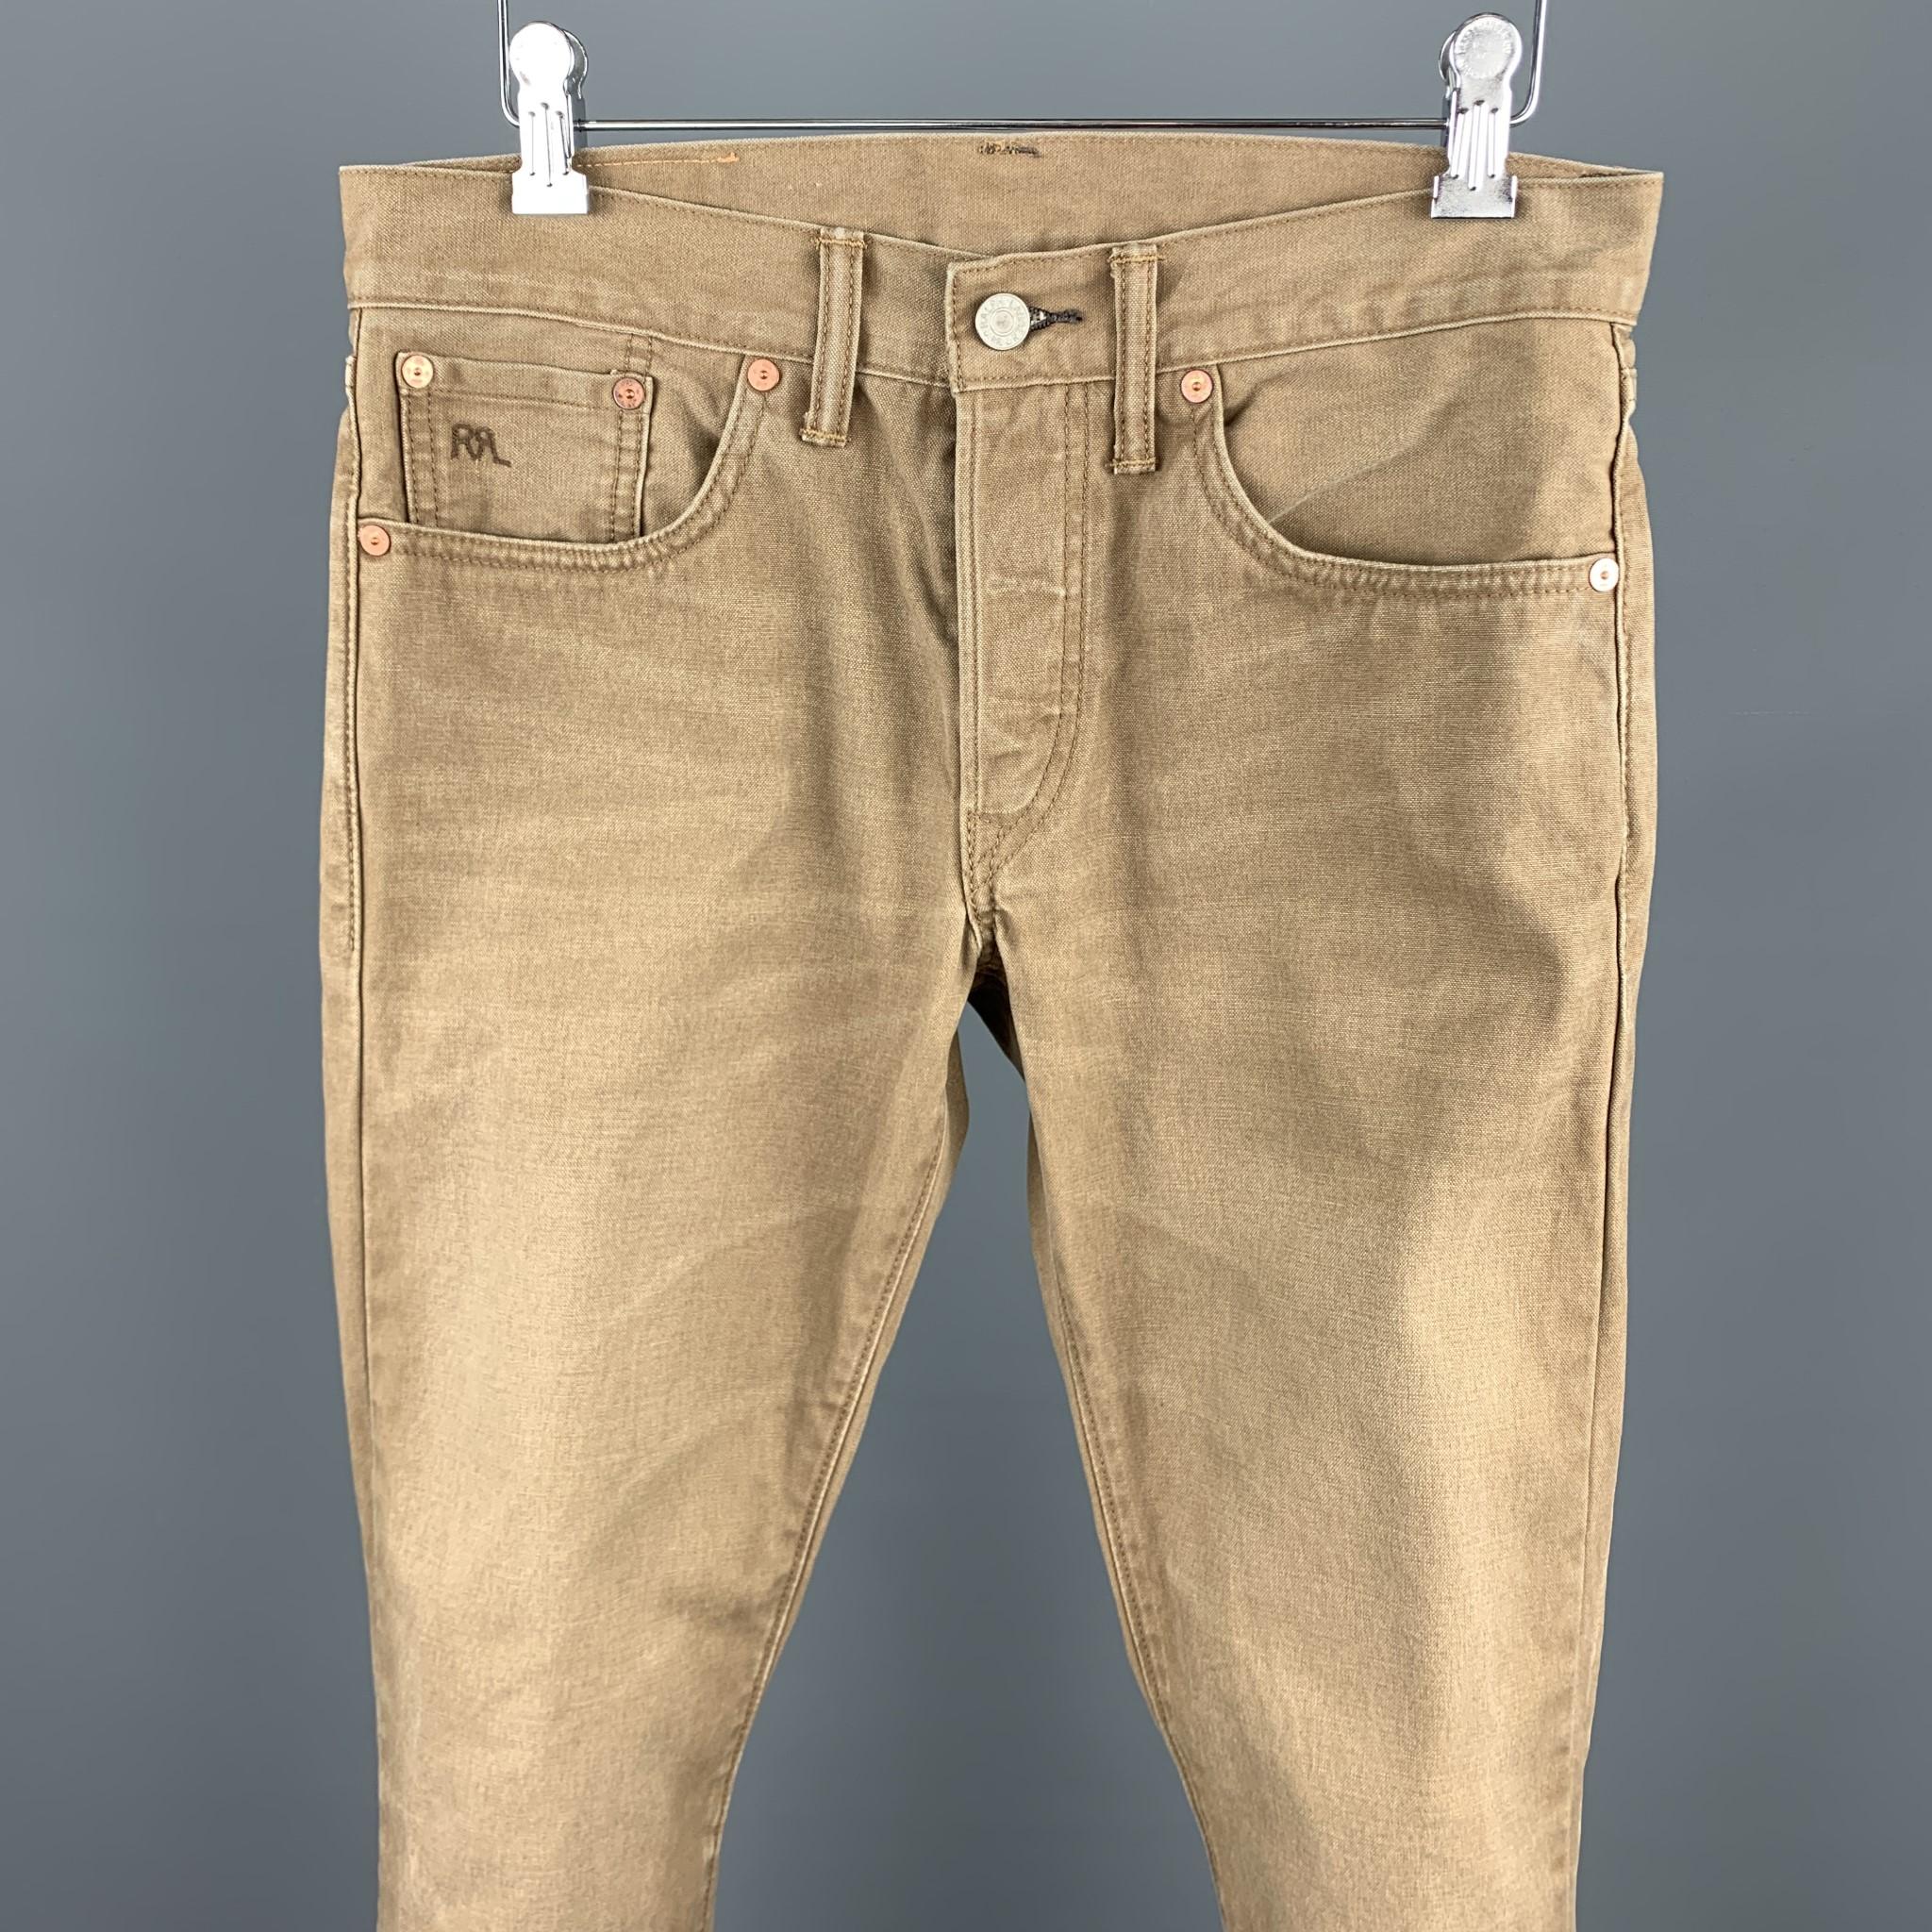 RRL by RALPH LAUREN casual pants comes in a tan cotton featuring a jean cut style, contrast stitching, and a zip fly closure.

Good Pre-Owned Condition.
Marked: 29x32

Measurements:

Waist: 30 in. 
Rise: 7.5 in. 
Inseam: 29 in. 